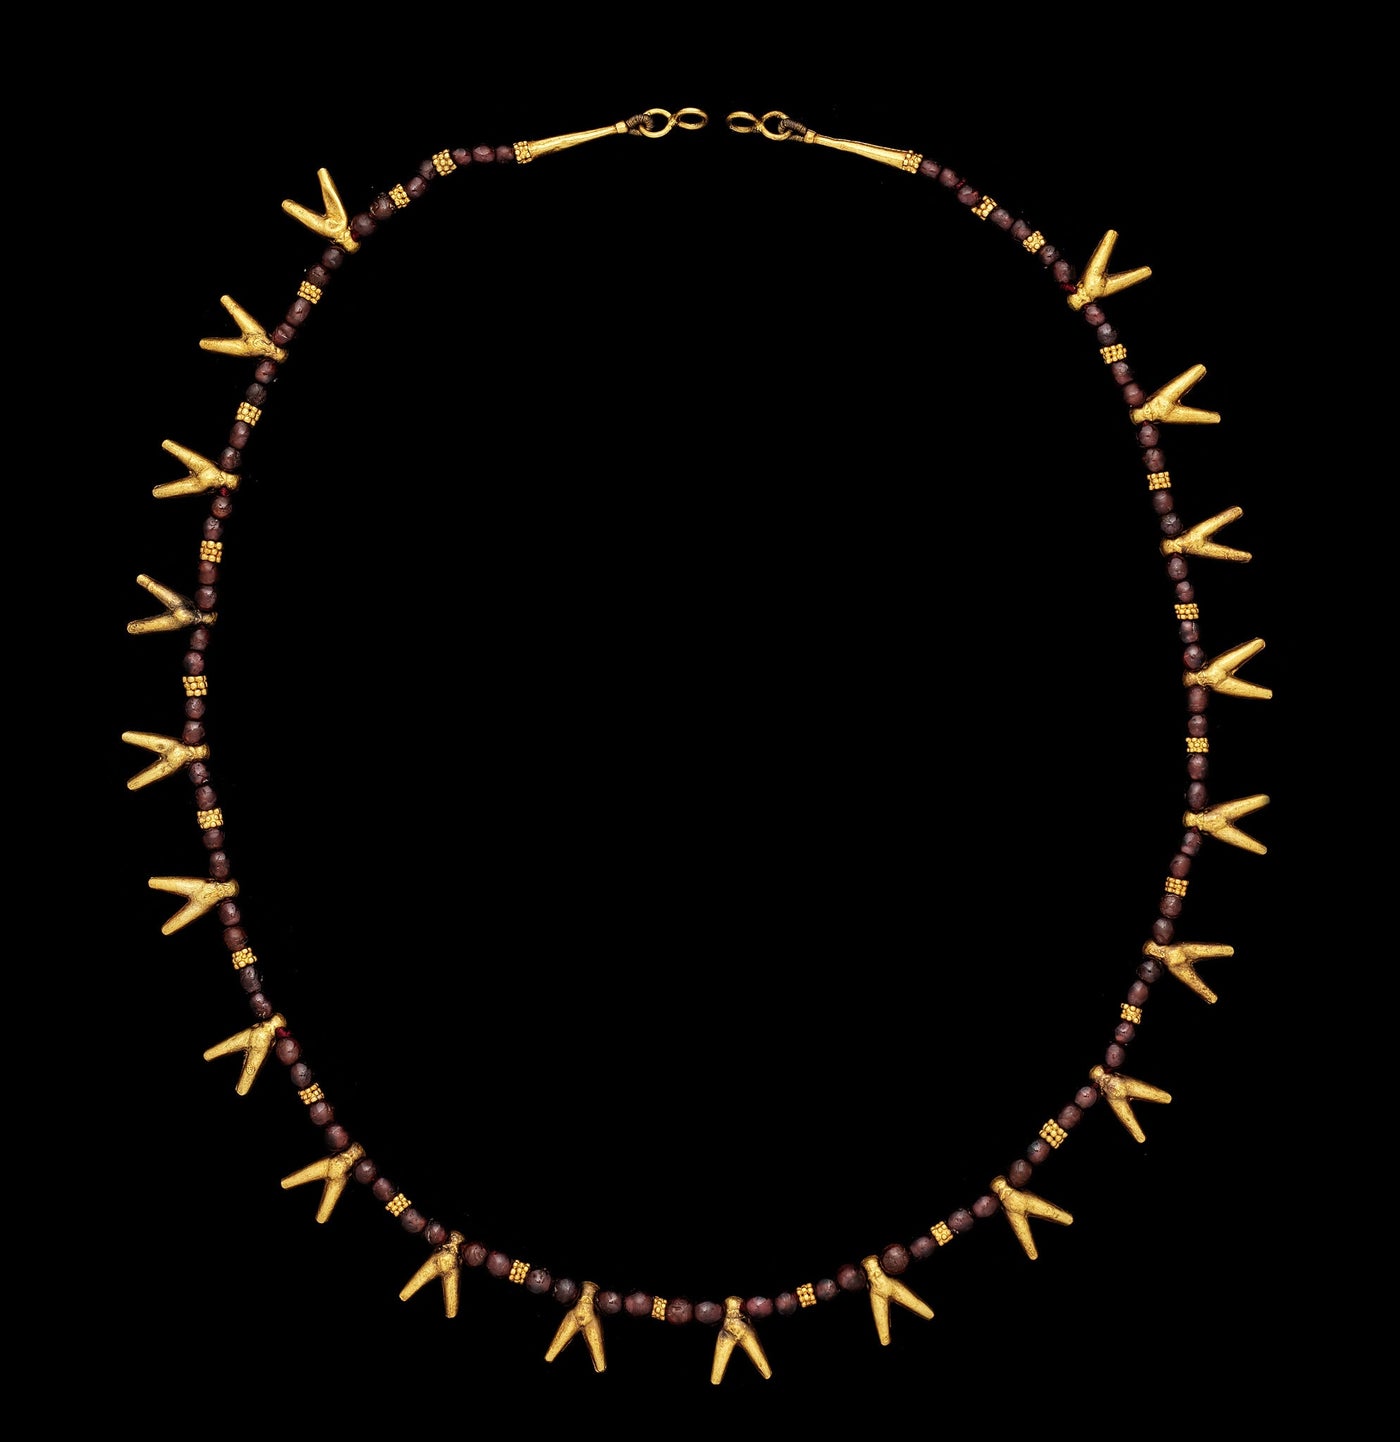 An Egyptian necklace with components circa 1550 to 1350 B.C.